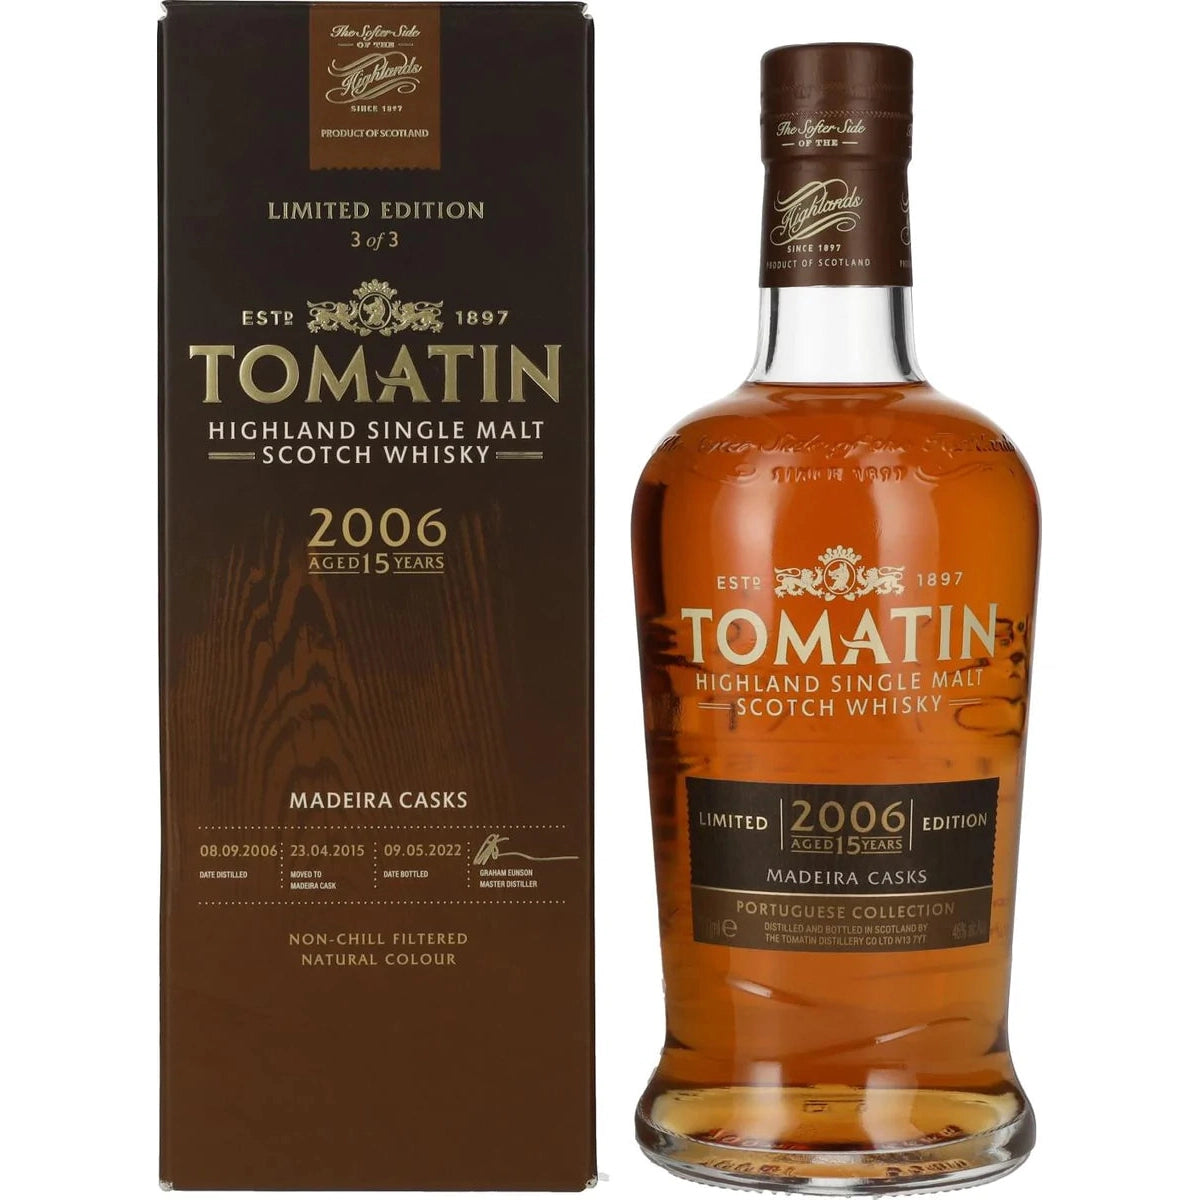 Tomatin 15 Years Old Portuguese Collection MADEIRA CASKS 2006 46% Vol. 0,7l in Giftbox